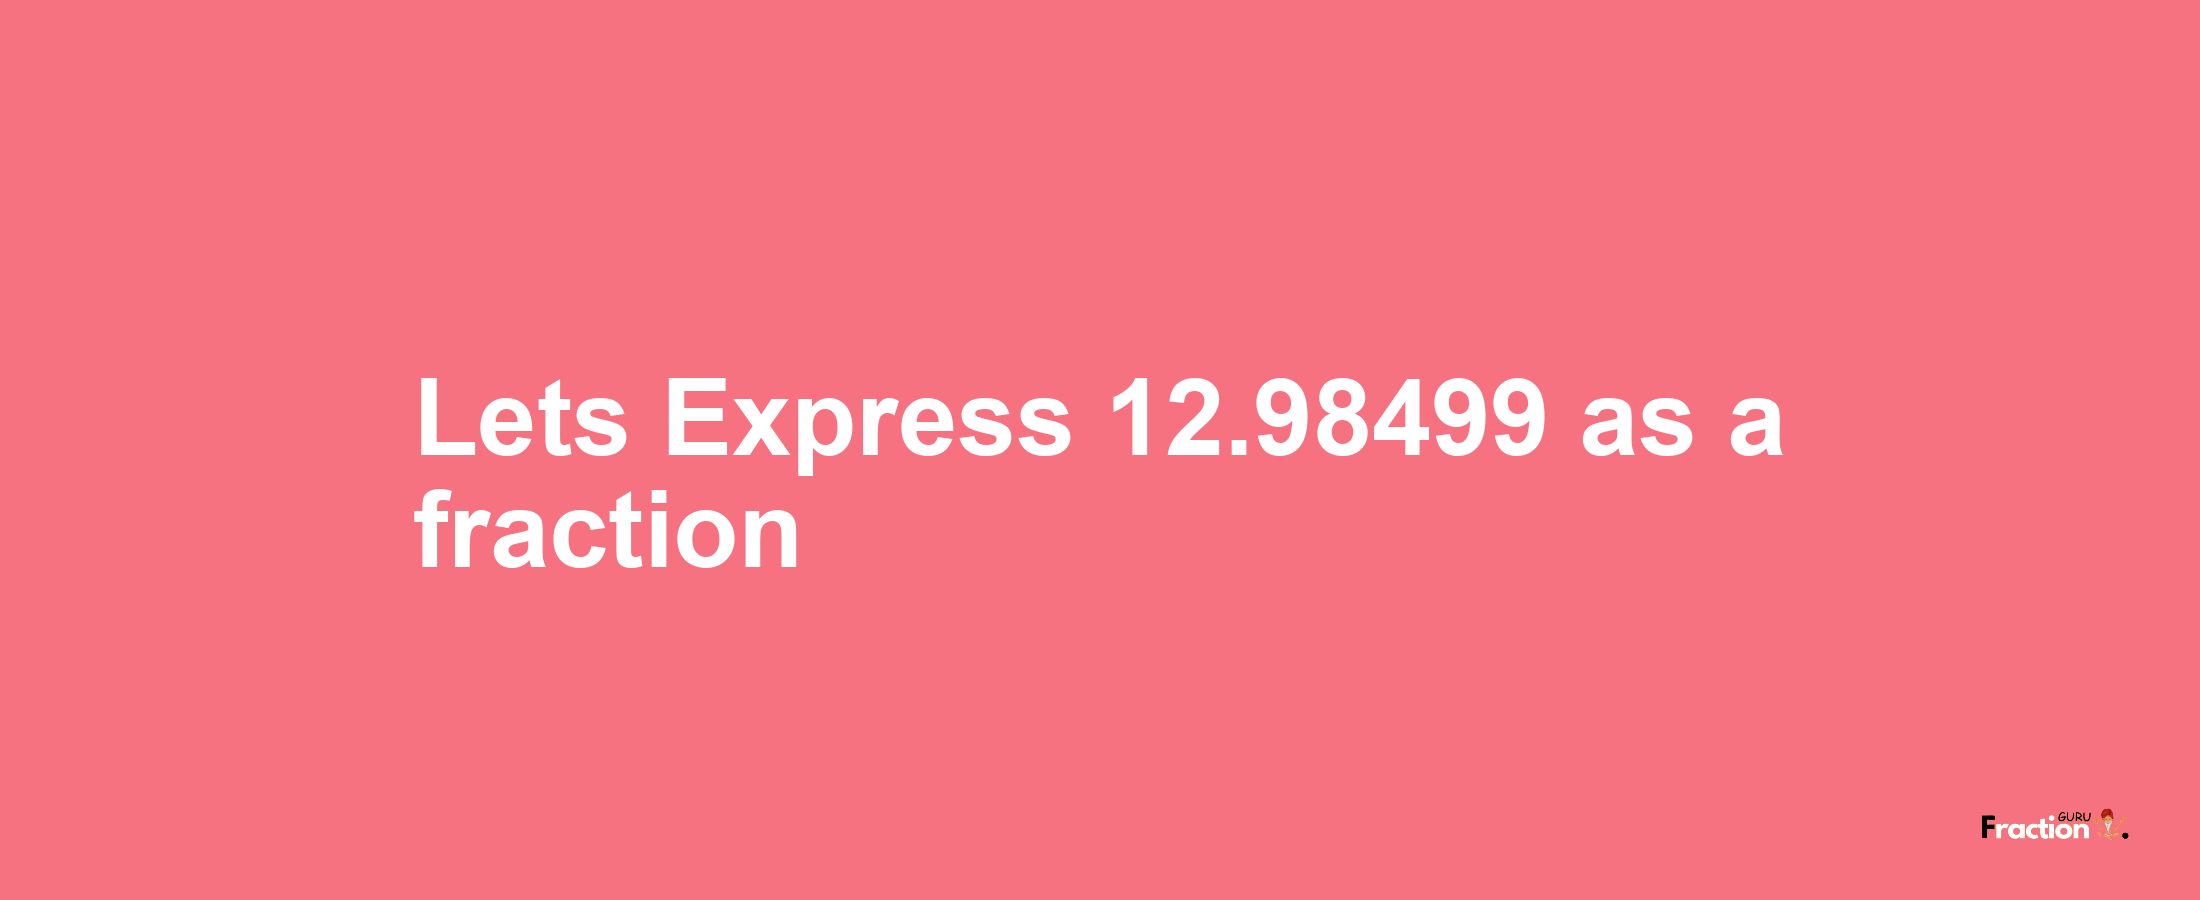 Lets Express 12.98499 as afraction